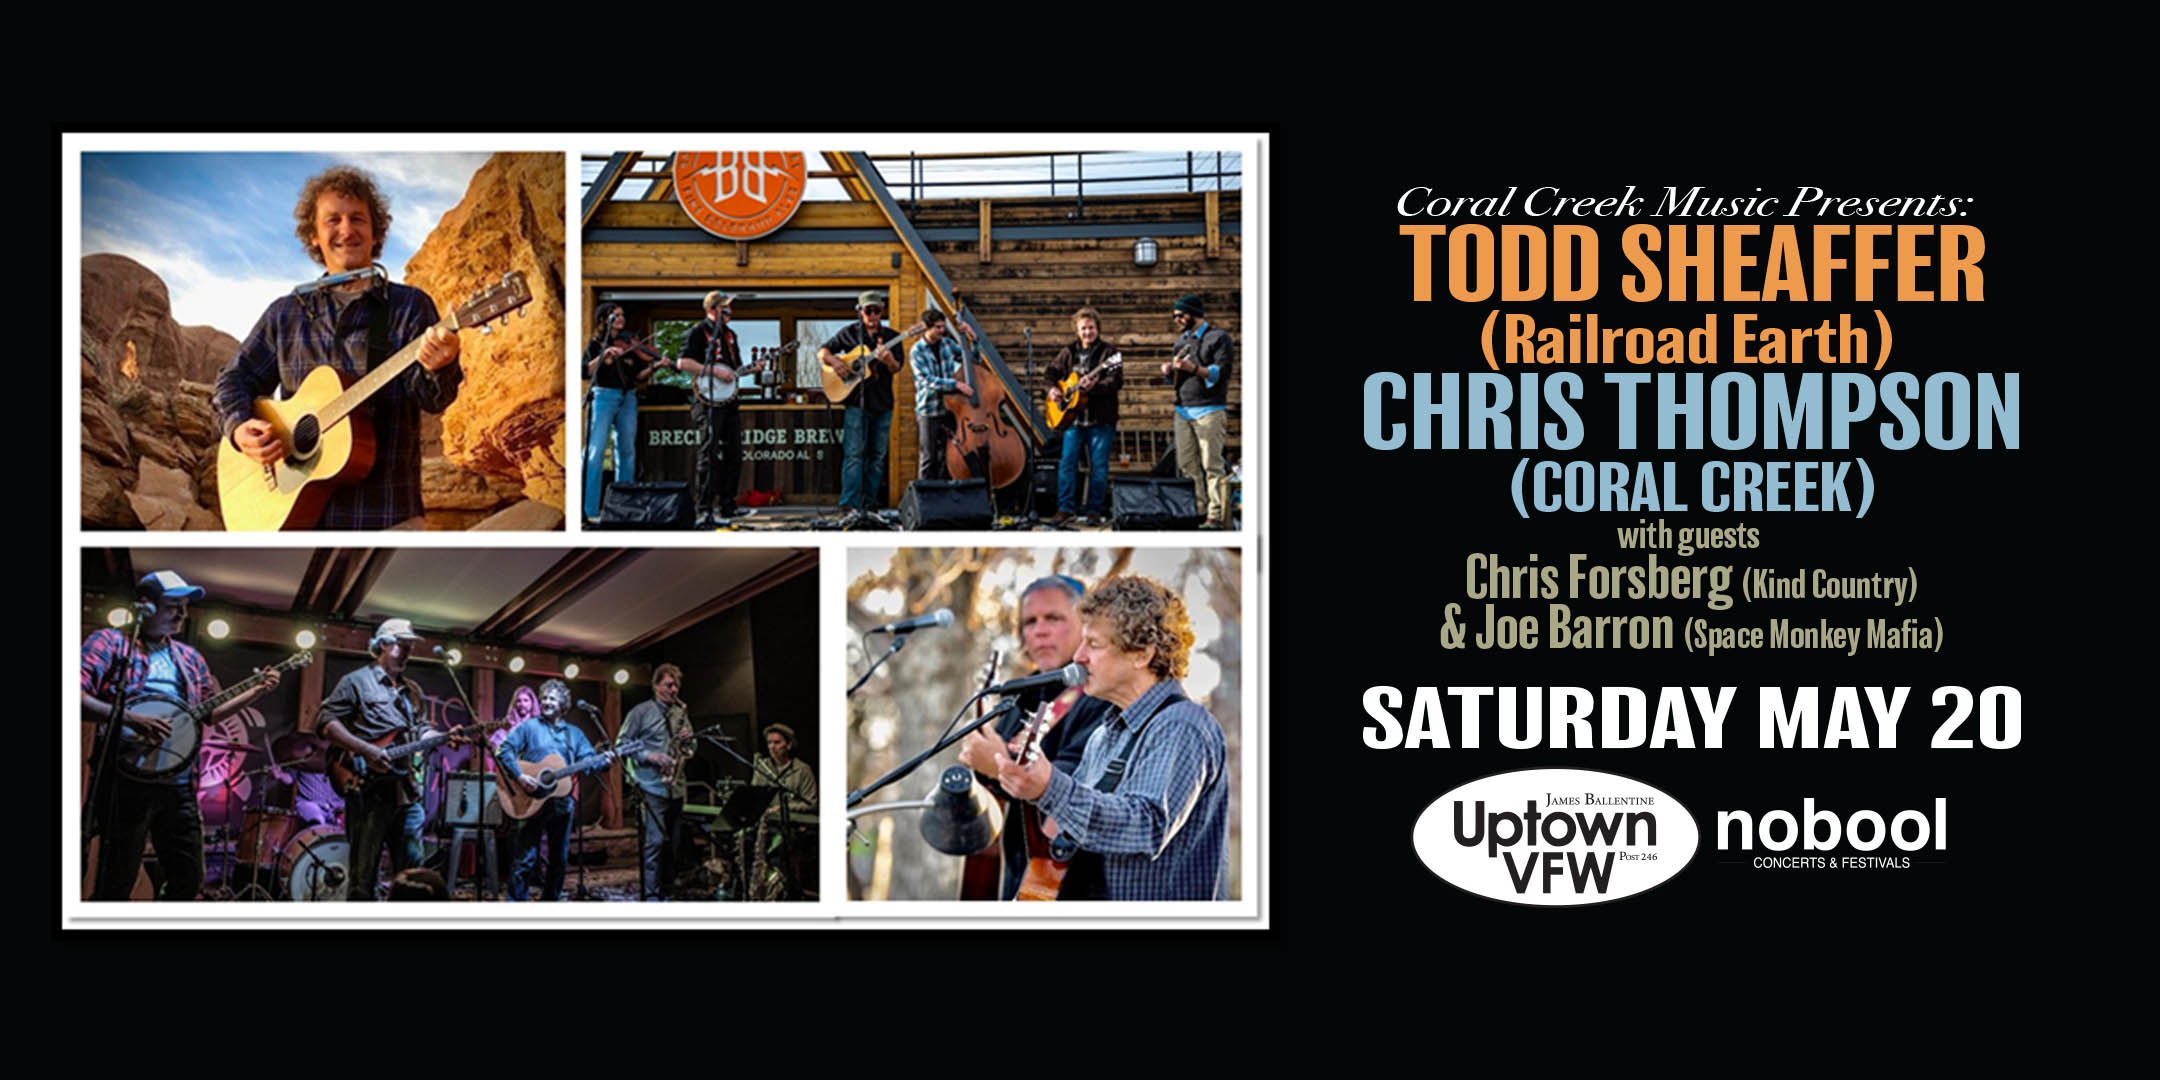 Coral Creek Music Presents Todd Sheaffer (Railroad Earth) / Chris Thompson (Coral Creek) with guests Chris Forsberg (Kind Country) & Joe Barron (Space Monkey Mafia) Saturday, May 20 James Ballentine "Uptown" VFW Post 246 Doors 8:30pm :: Music 9:00pm :: 21+ $25 ADV / $30 DOS NO REFUNDS